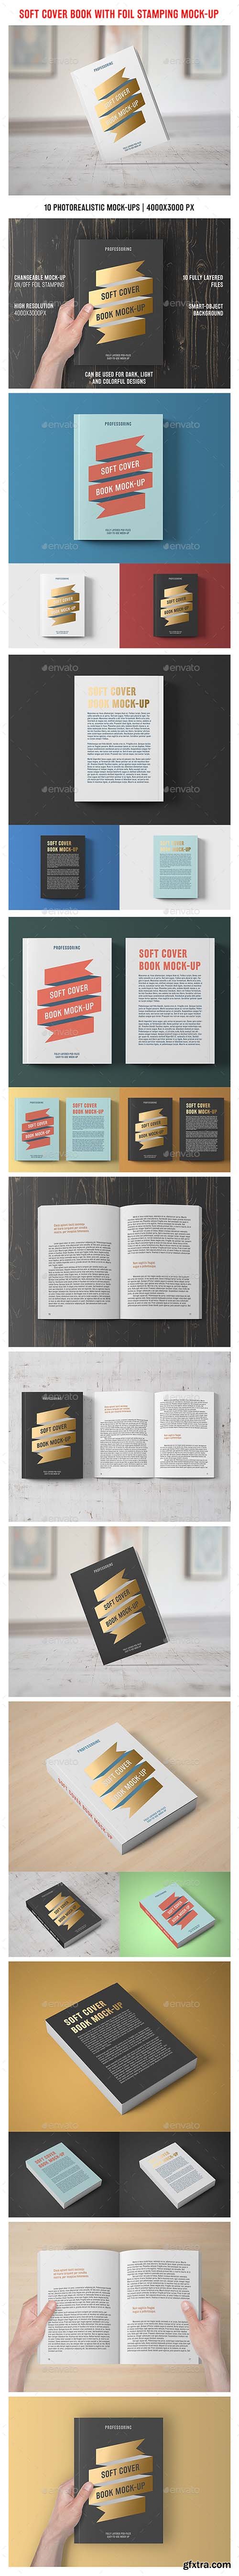 Graphicriver Soft Cover Book With Foil Stamping Mock-Up 16878031